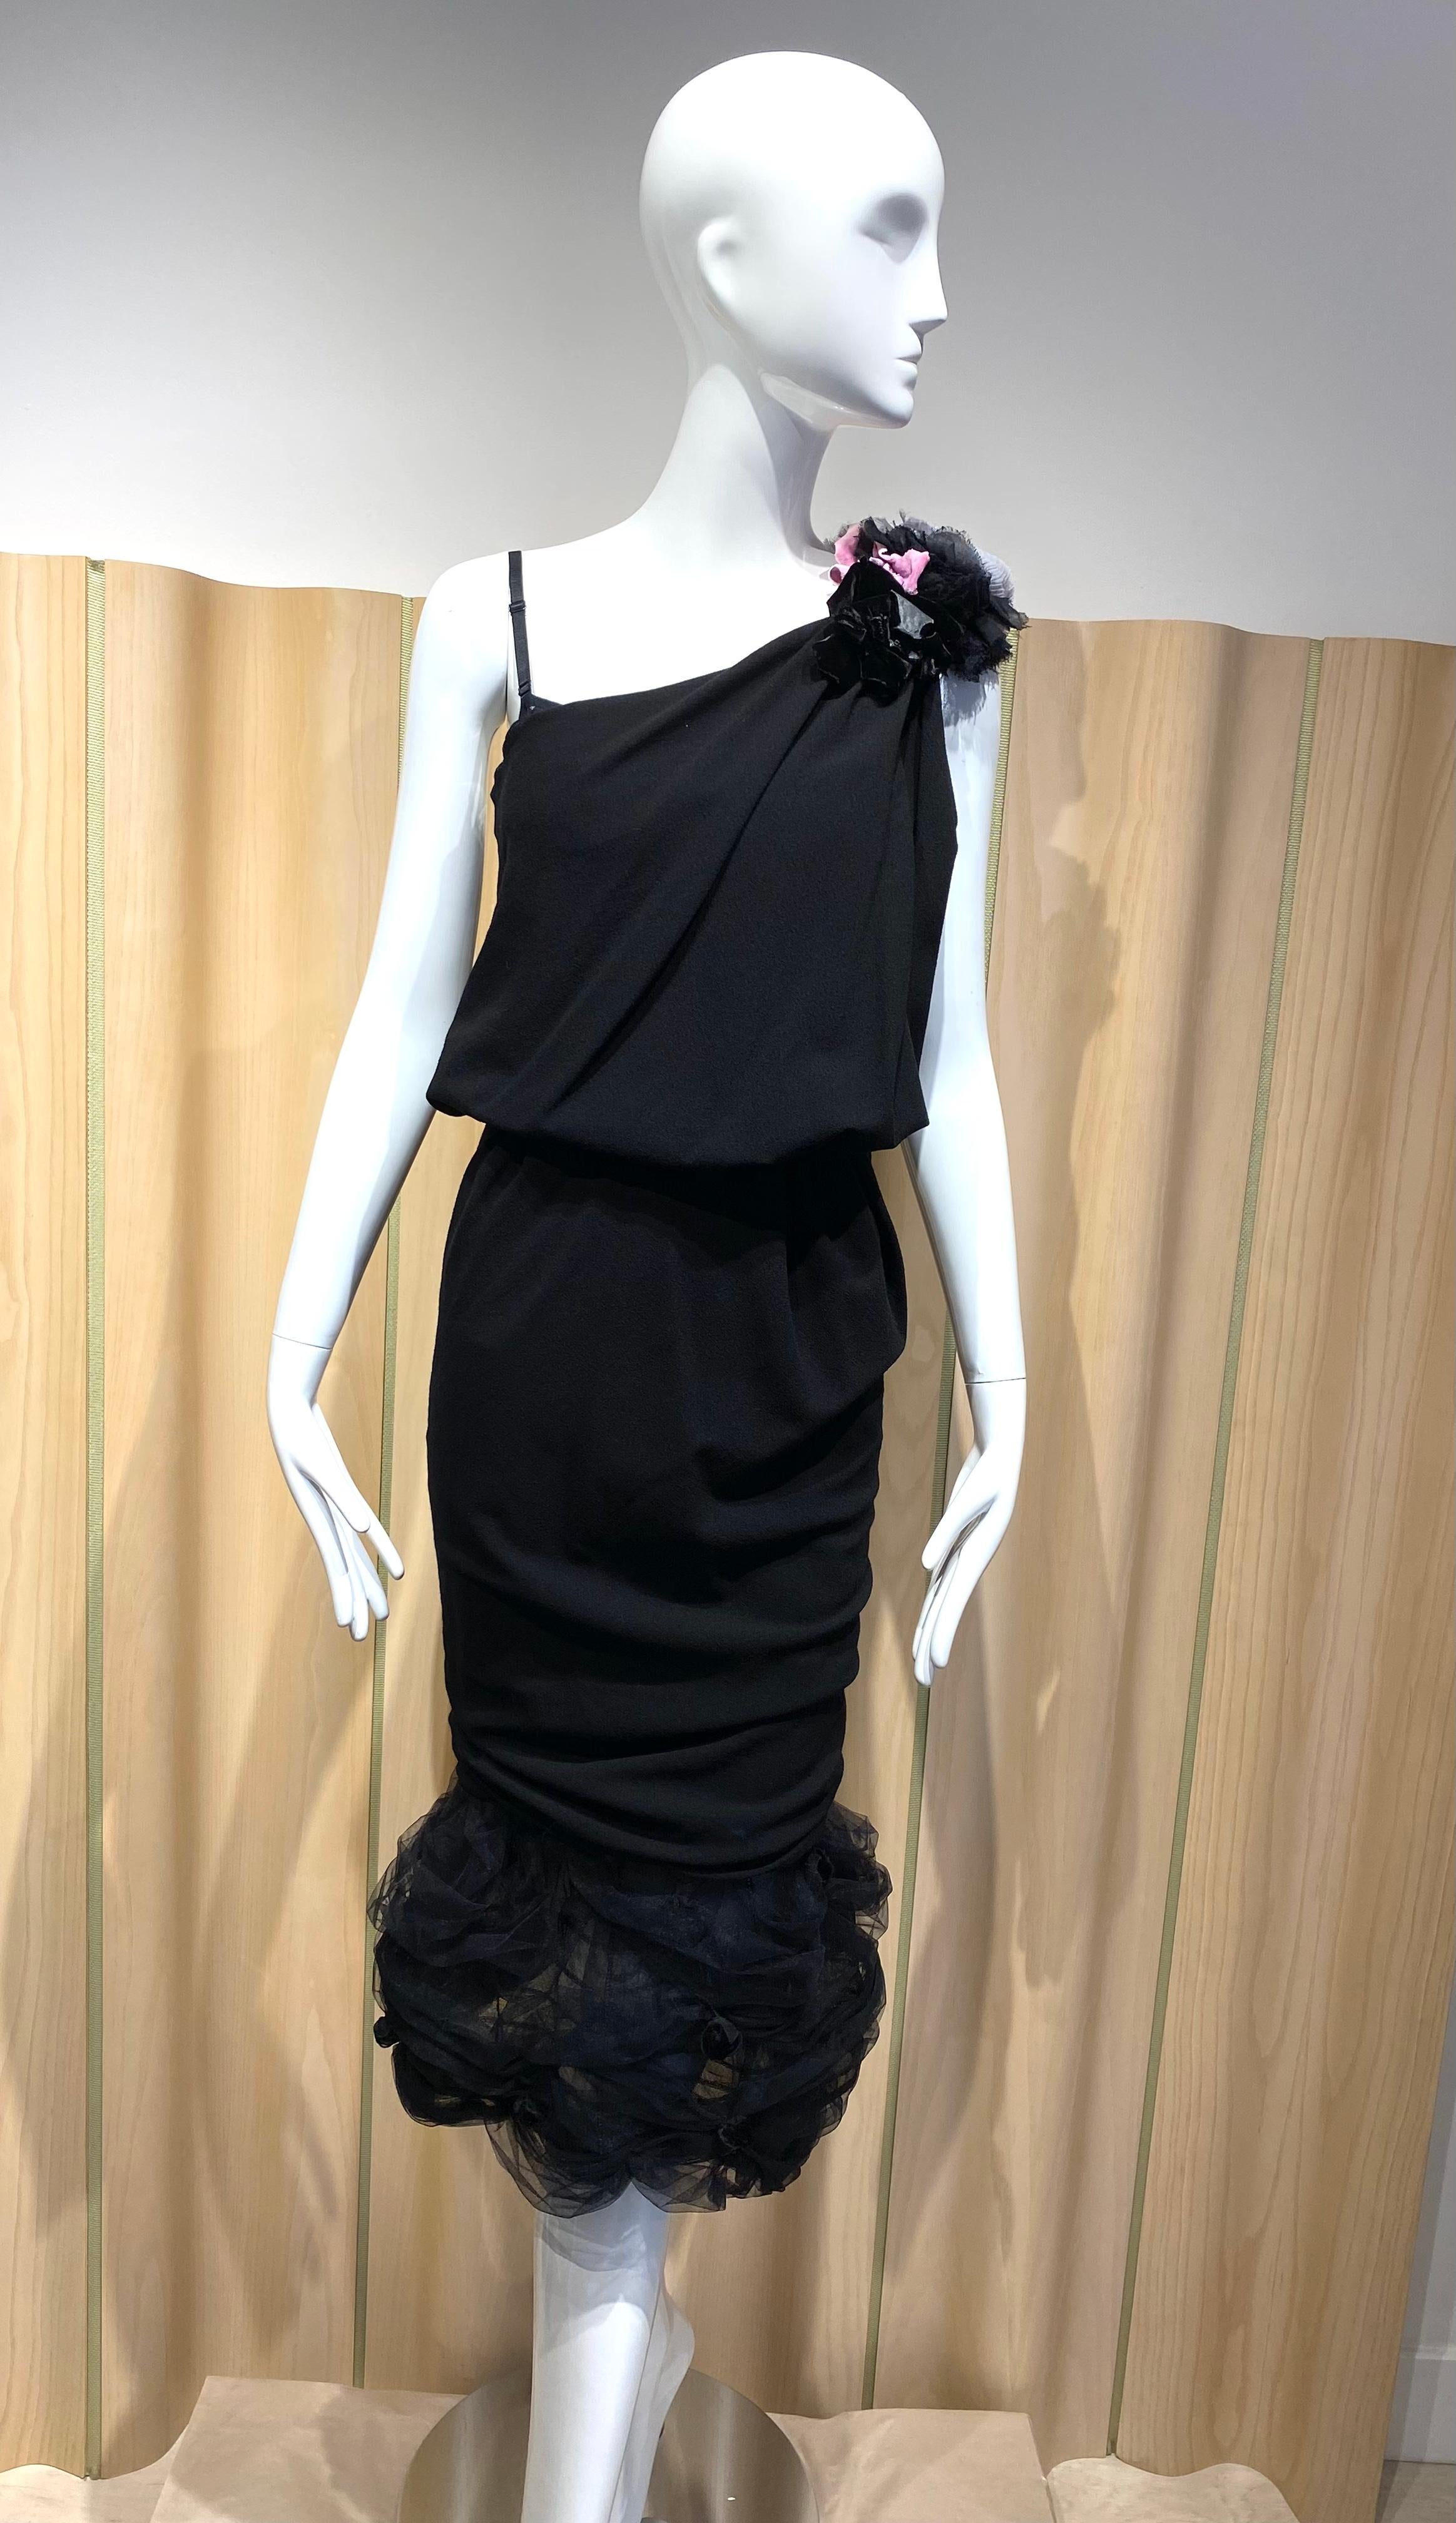 Sexy Nina Ricci Black Crepe asymmetrical fitted dress with built in corset bra and rosette.
spaghetti strap . ruching. ruffles, 
Perfect cocktail dress.
Bust fit 31” stretch to 32”/ Waist 26”. Hip 34”/ length 46’
Dress in excellent condition